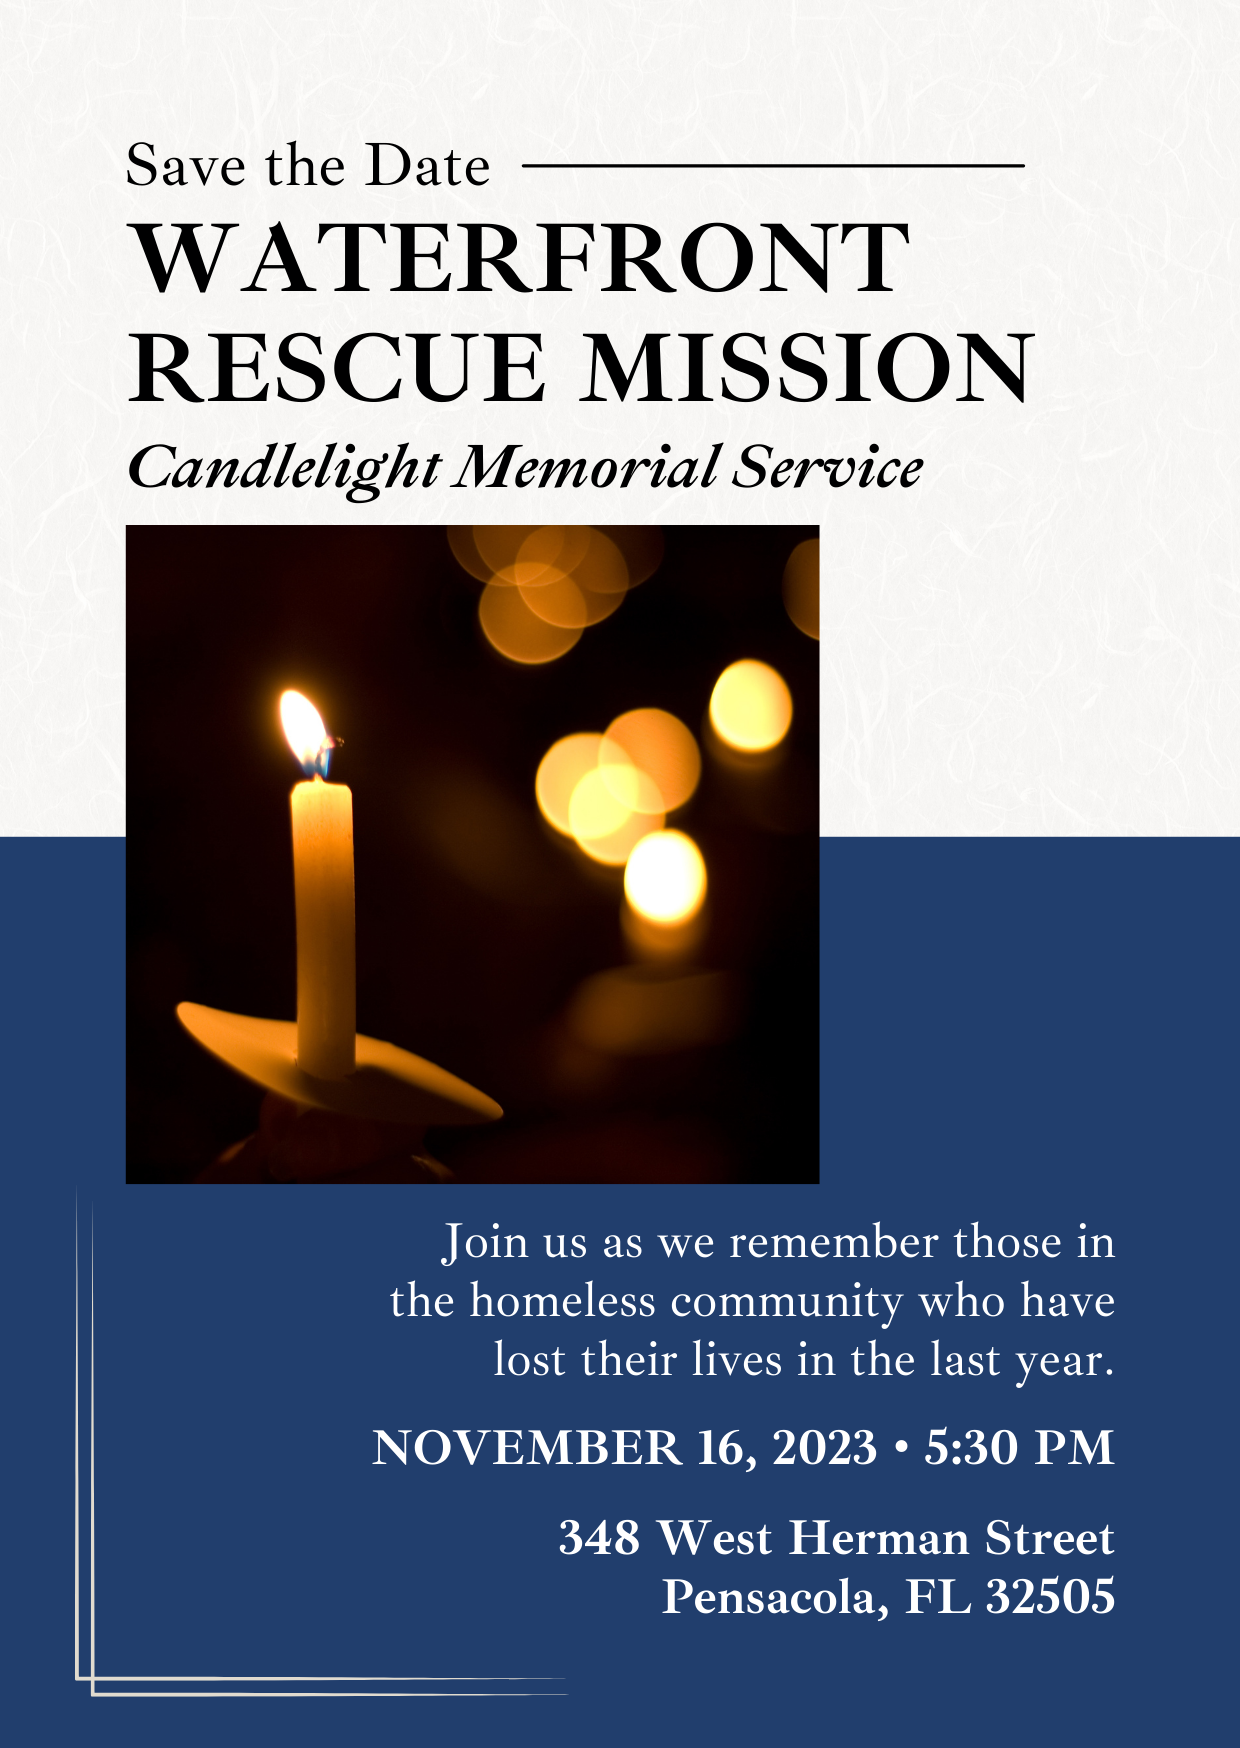 2023 Candlelight Memorial Service Waterfront Mission